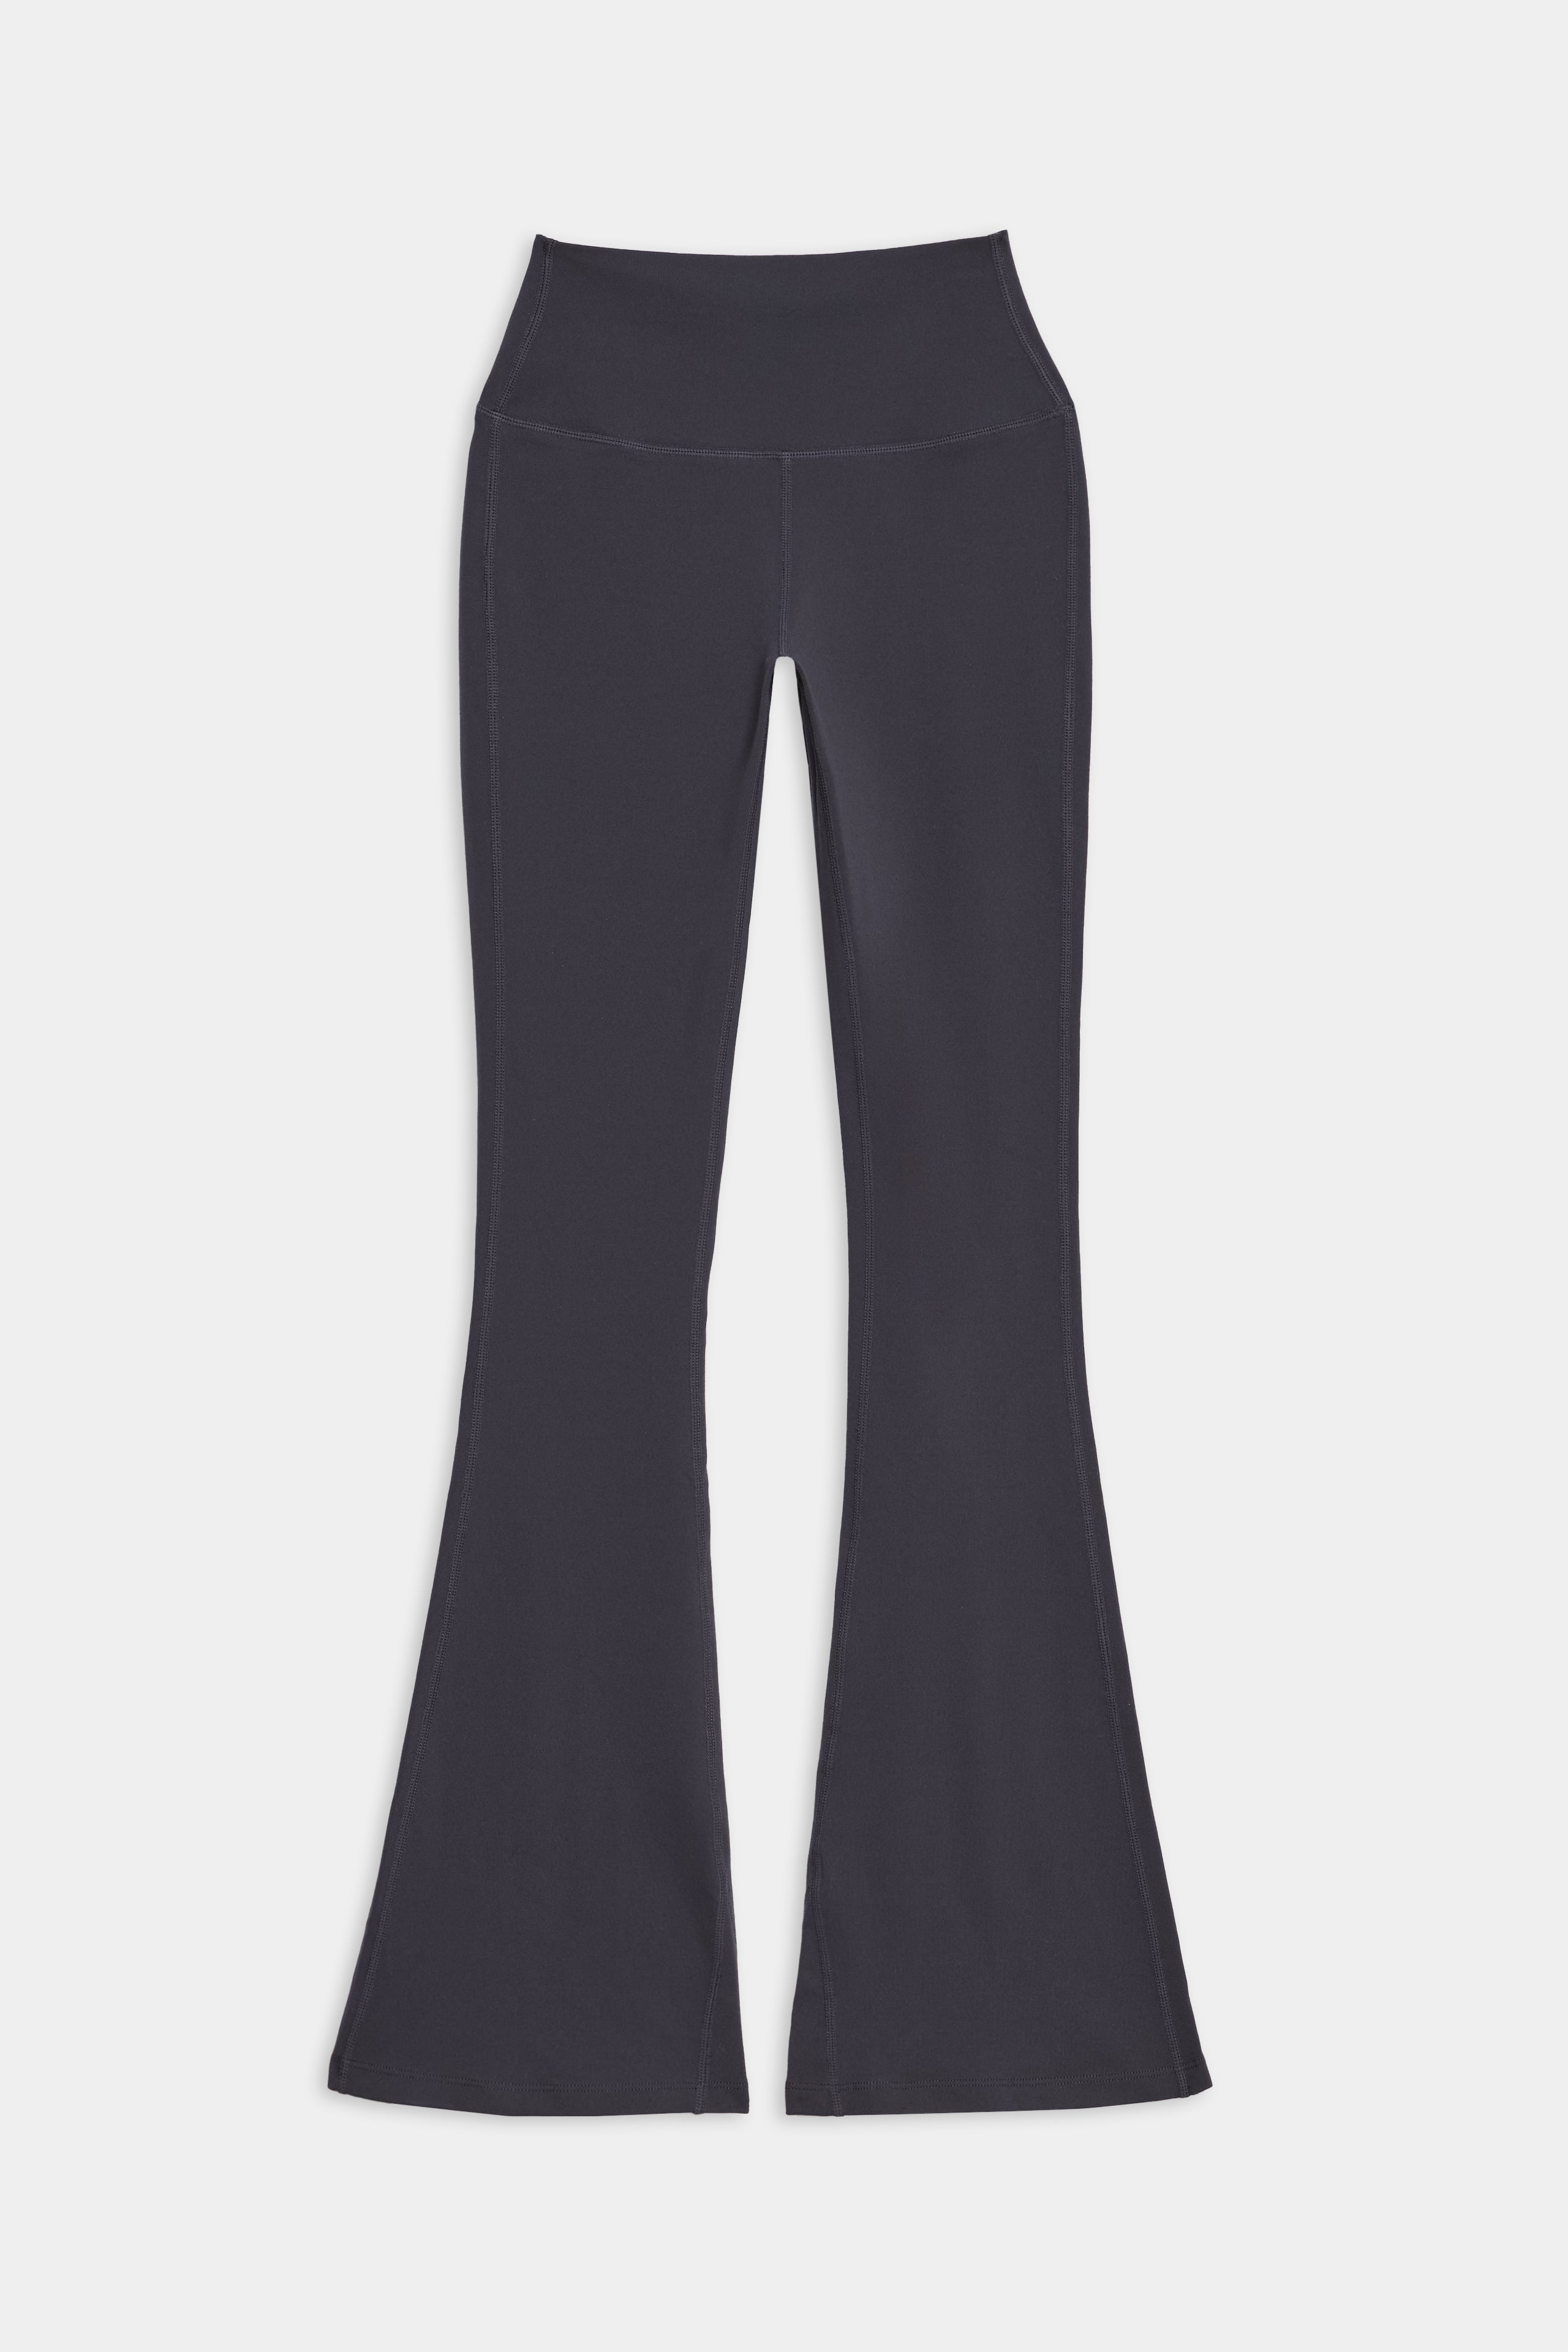 Splits59 Raquel Stripe High-Waisted Flare Pant  Urban Outfitters Mexico -  Clothing, Music, Home & Accessories